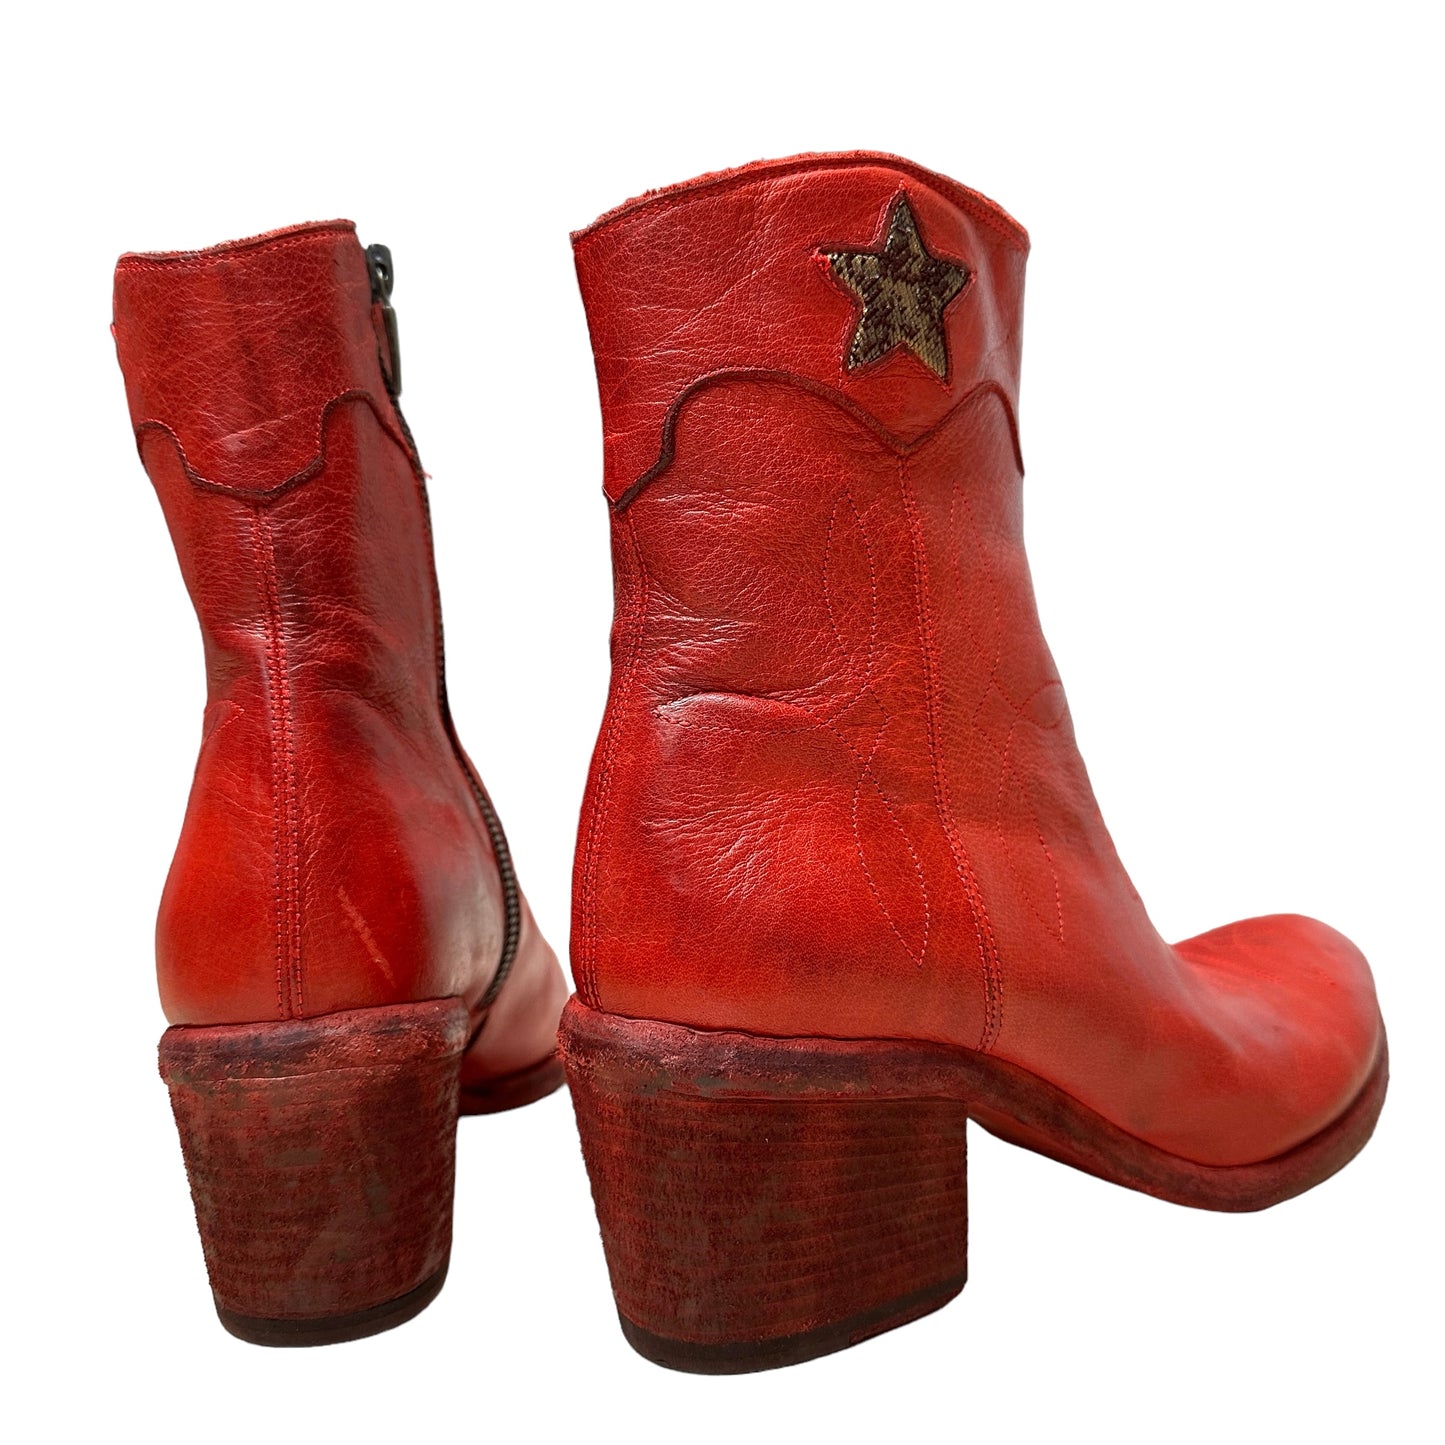 Red Leather Boots - 7